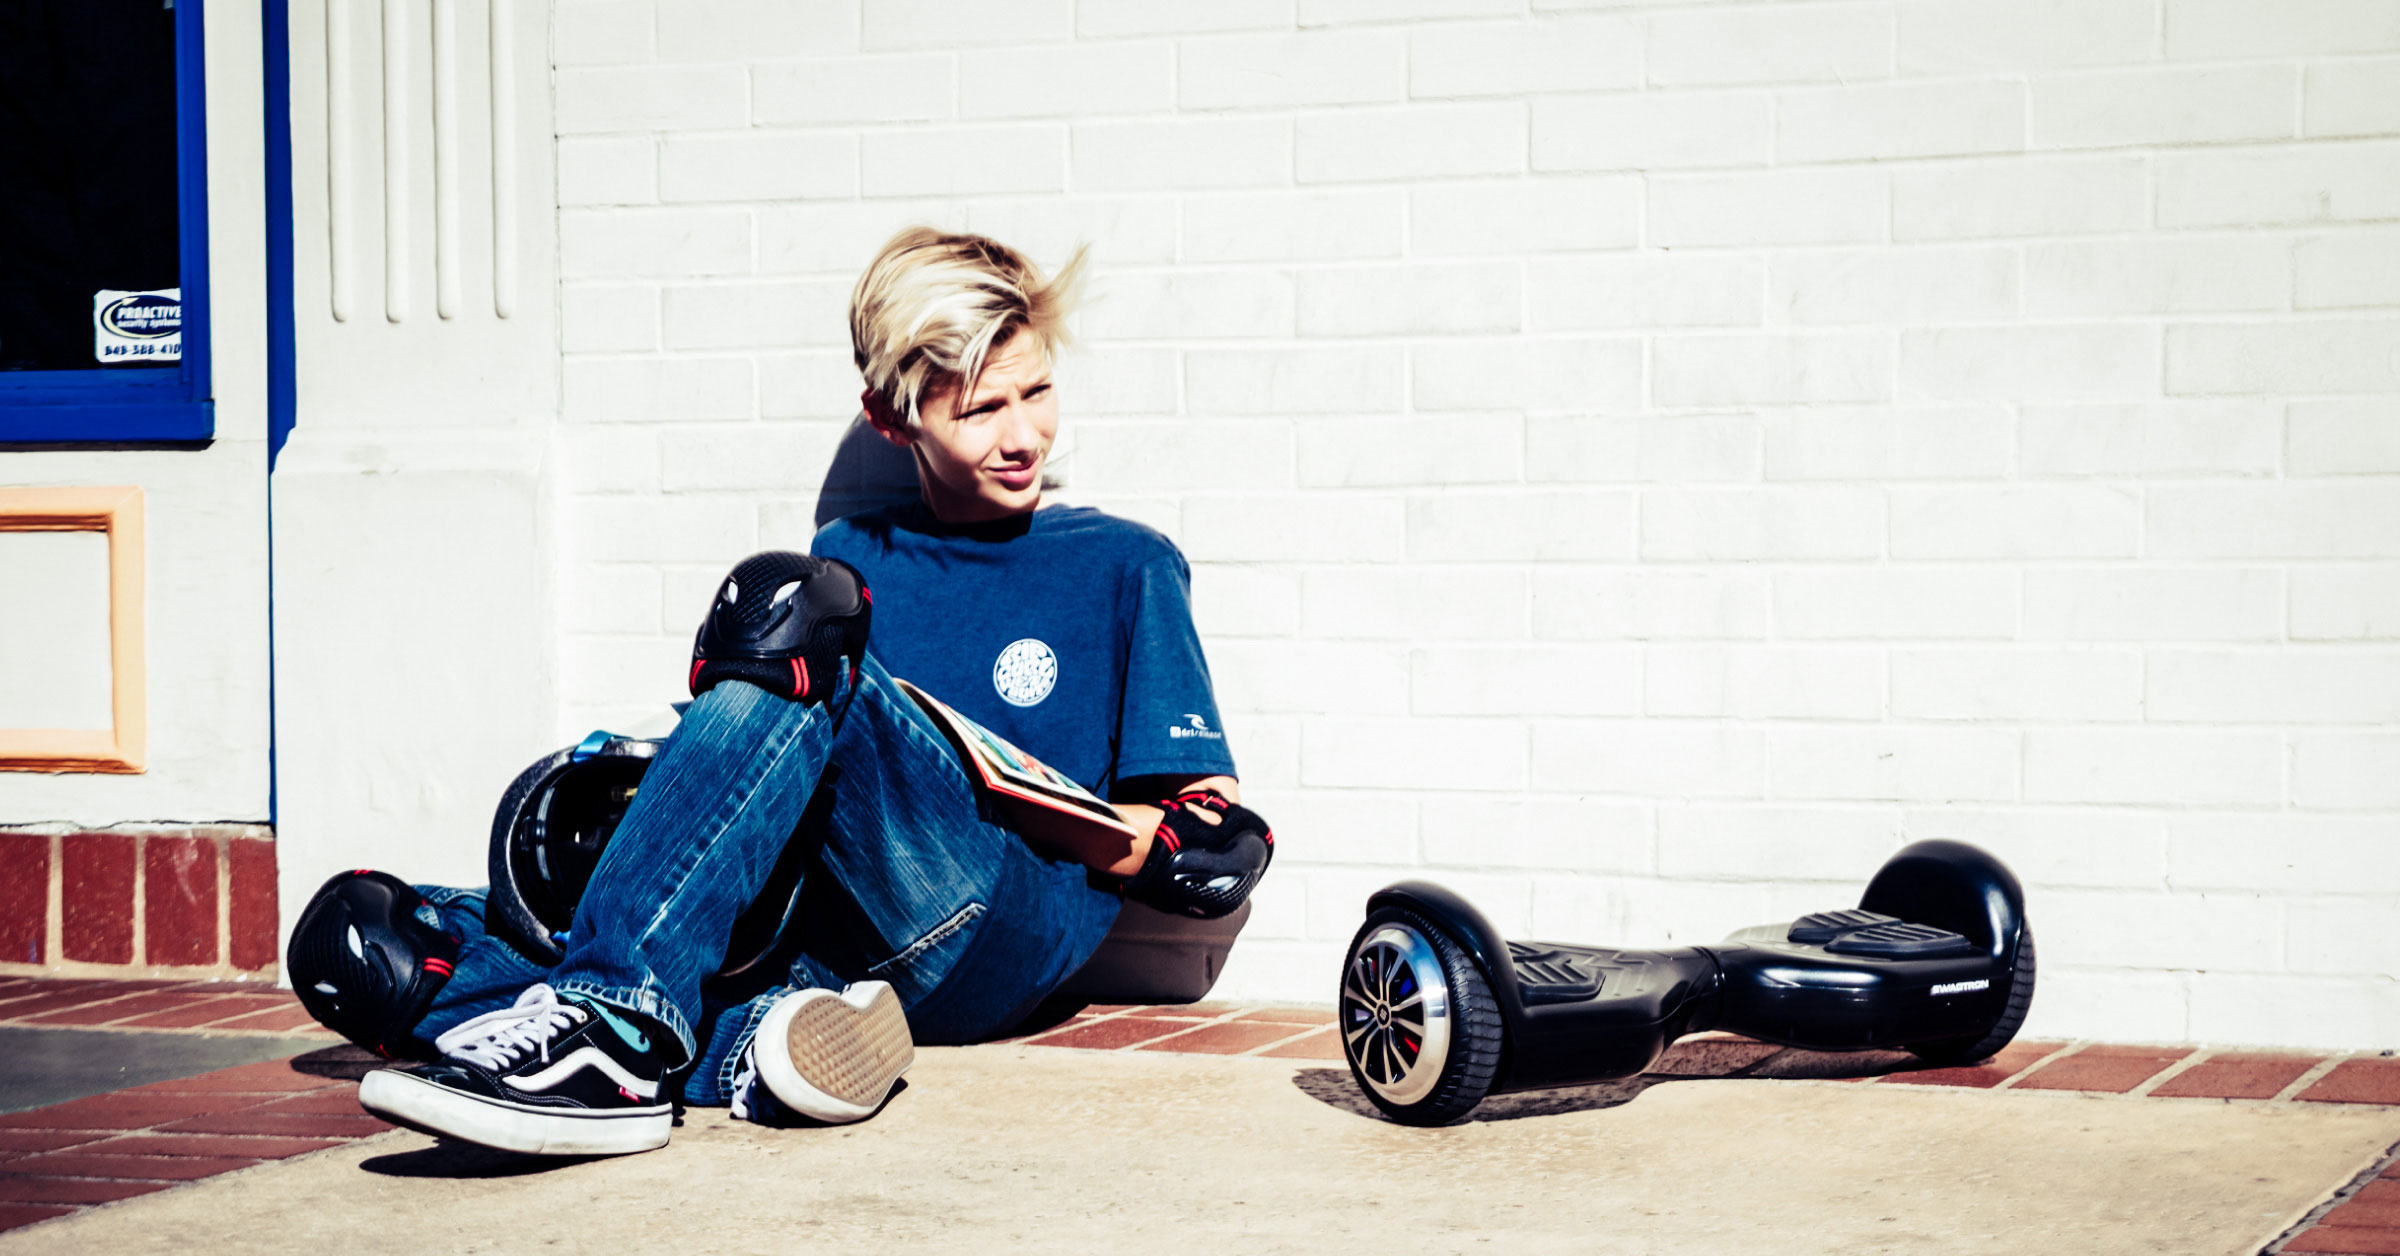 The Complete Guide to Riding an Electronic Hoverboard